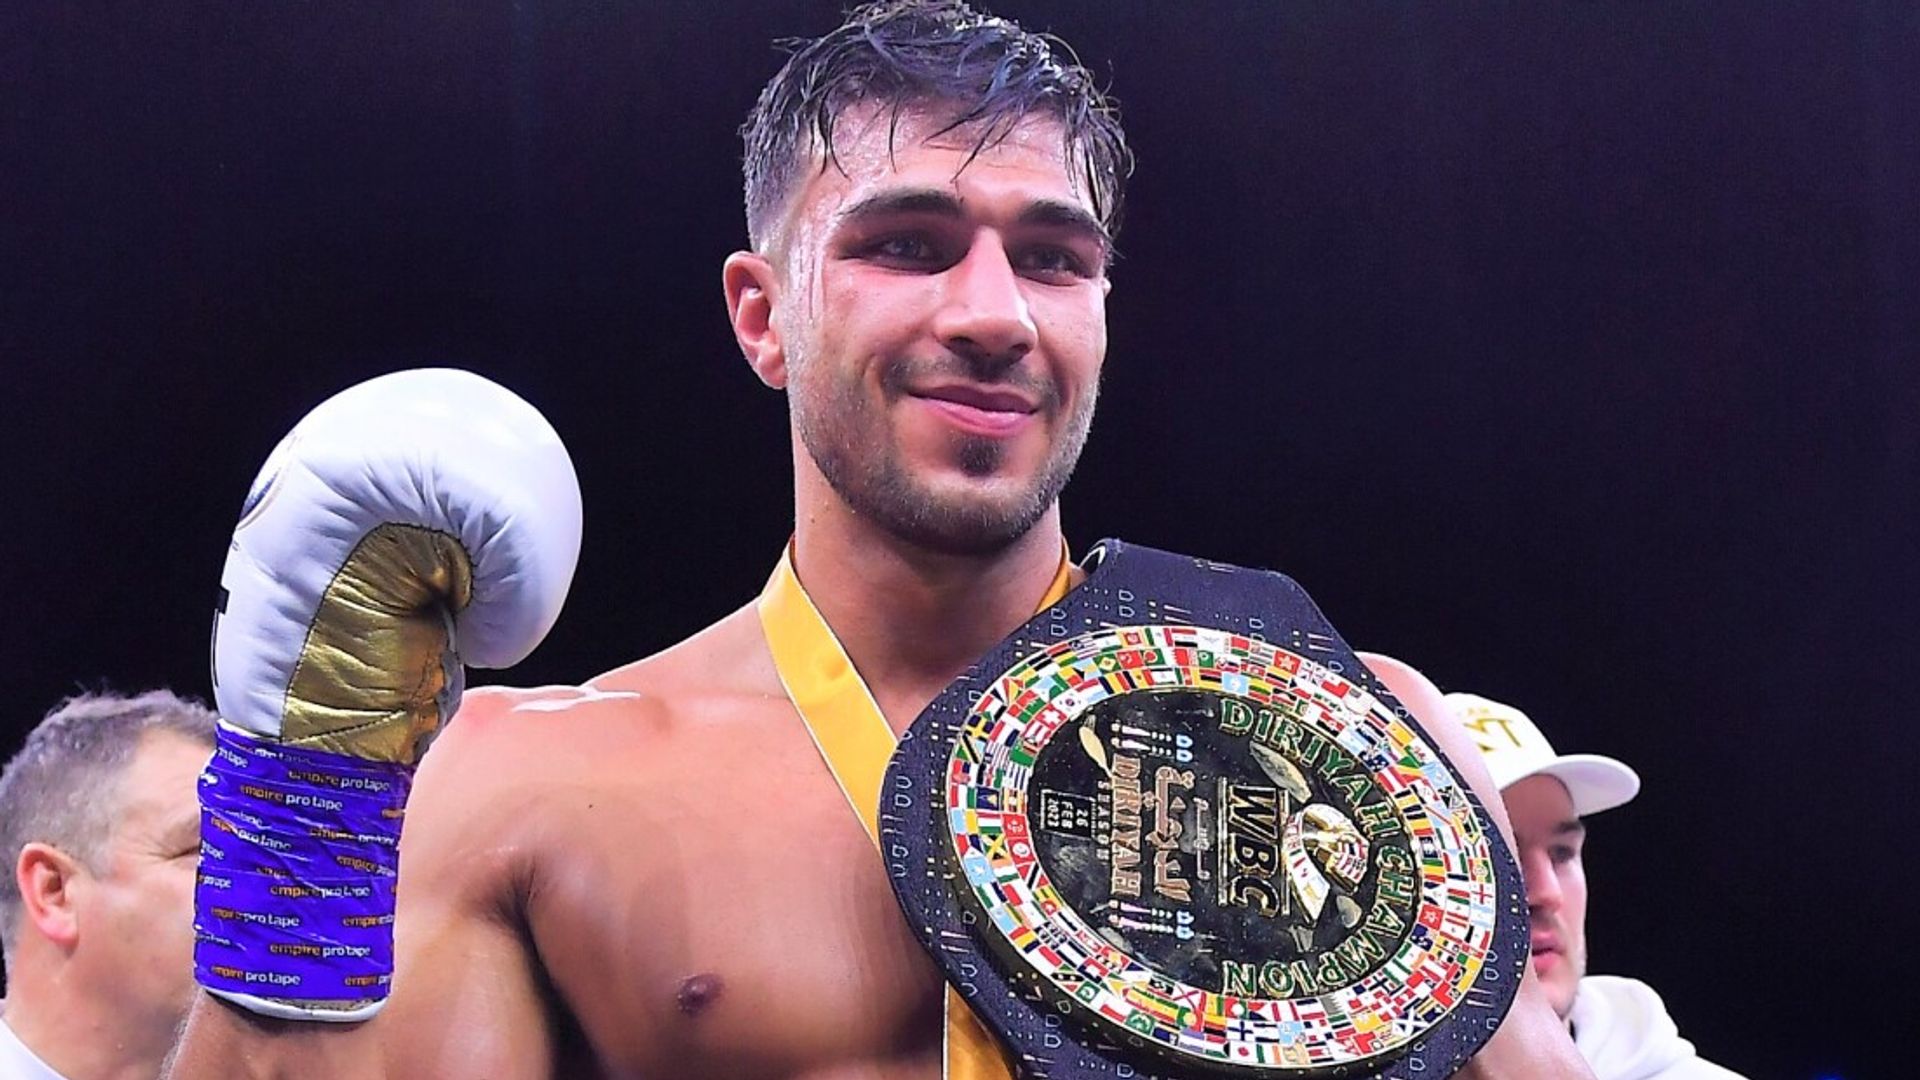 If Tommy Fury wants credibility, who should he fight now?